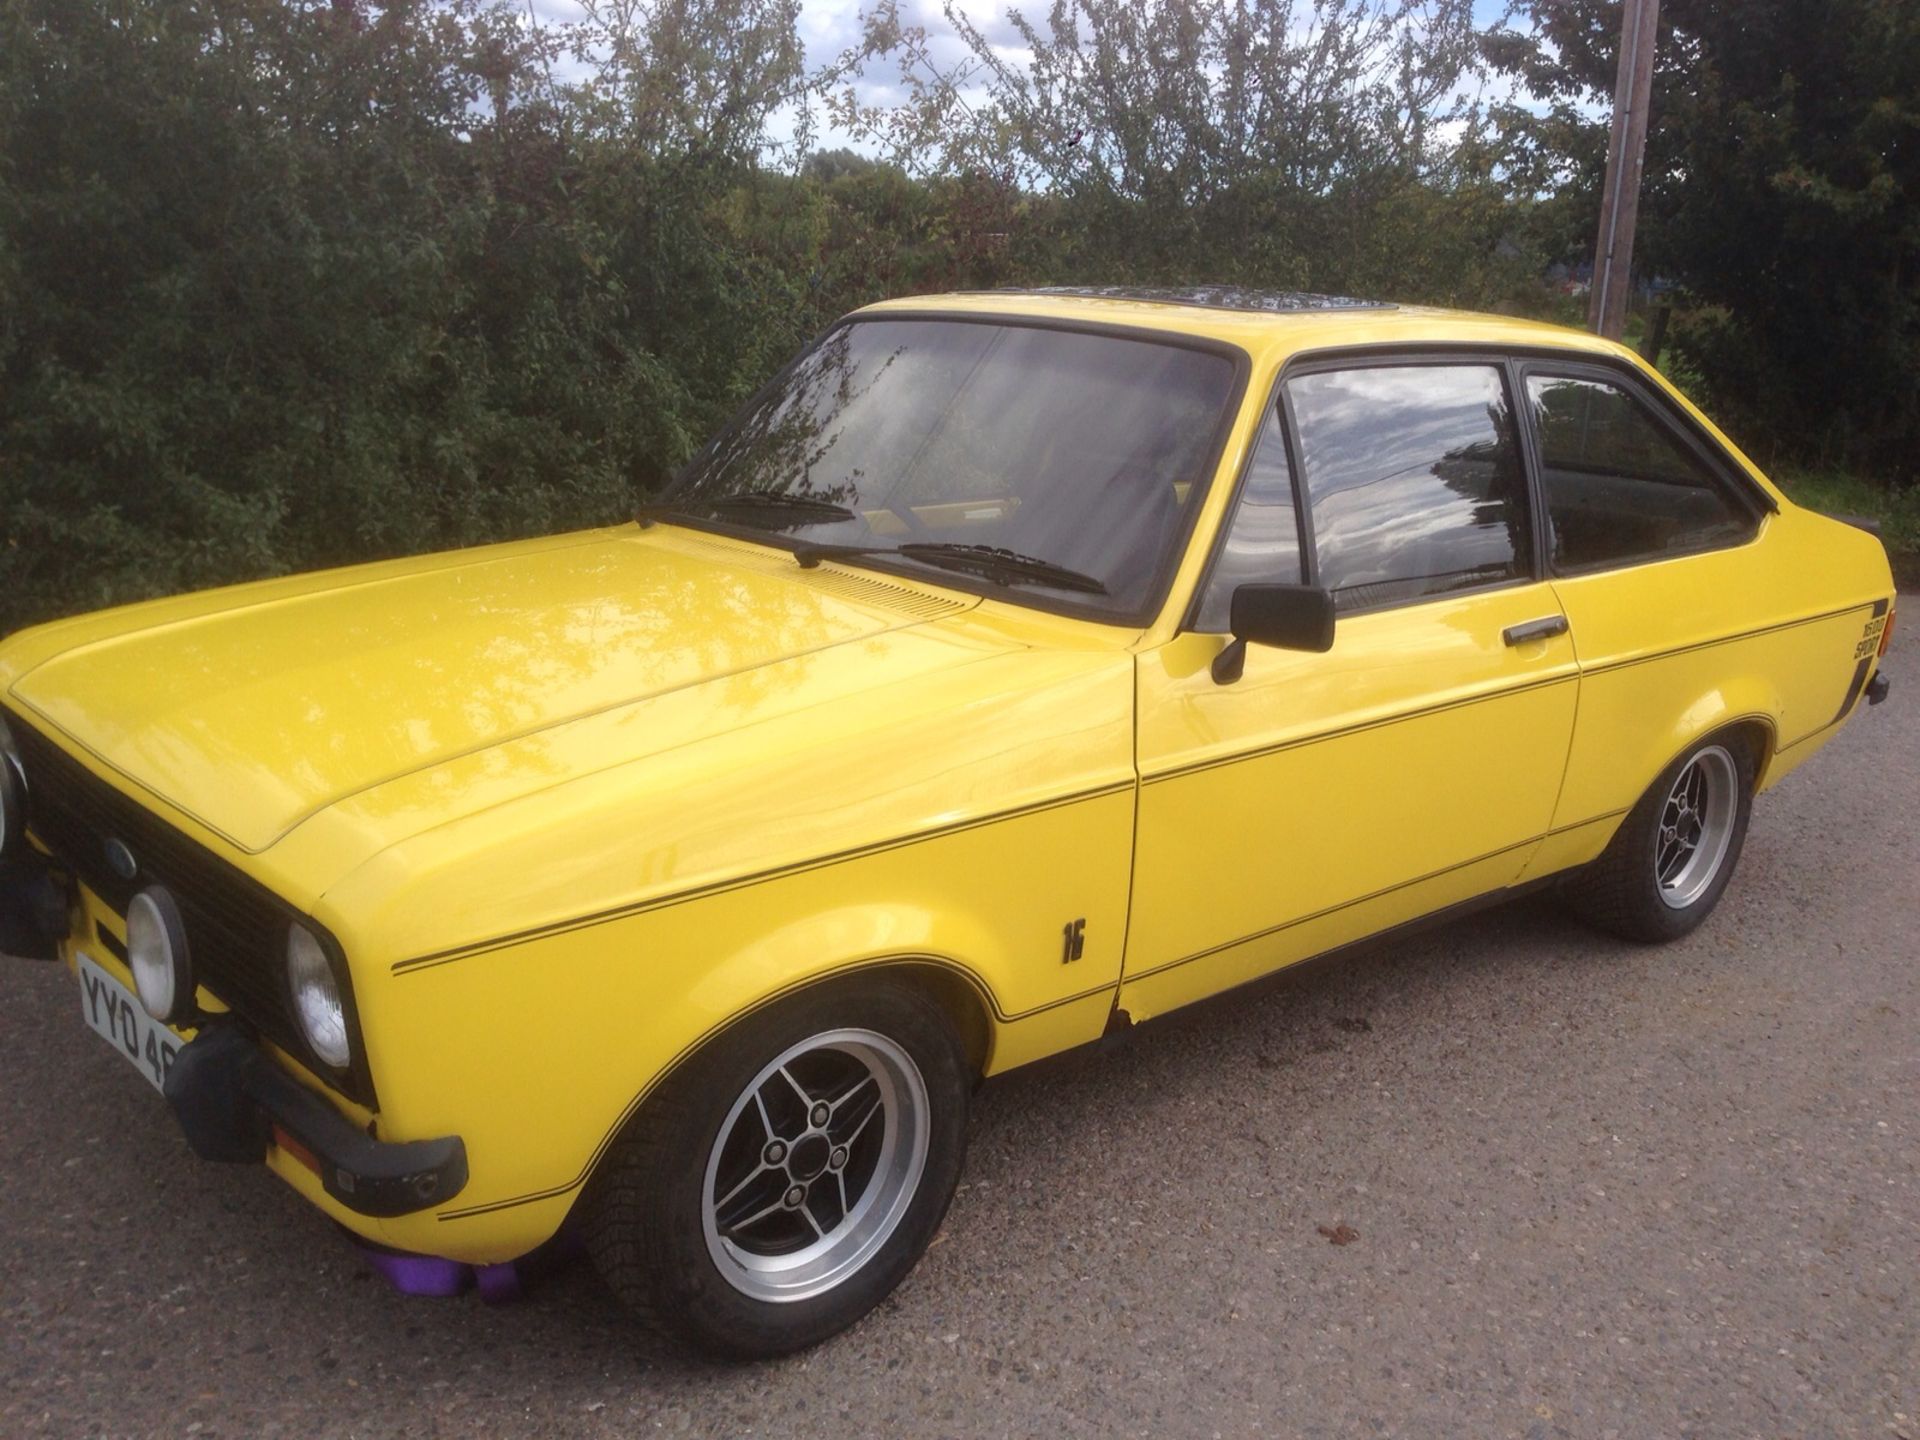 1979/T Ford Escort mk2 1600 Sport - in Signal yellow -  UK car  (545 miles) since rebuild - Image 2 of 54